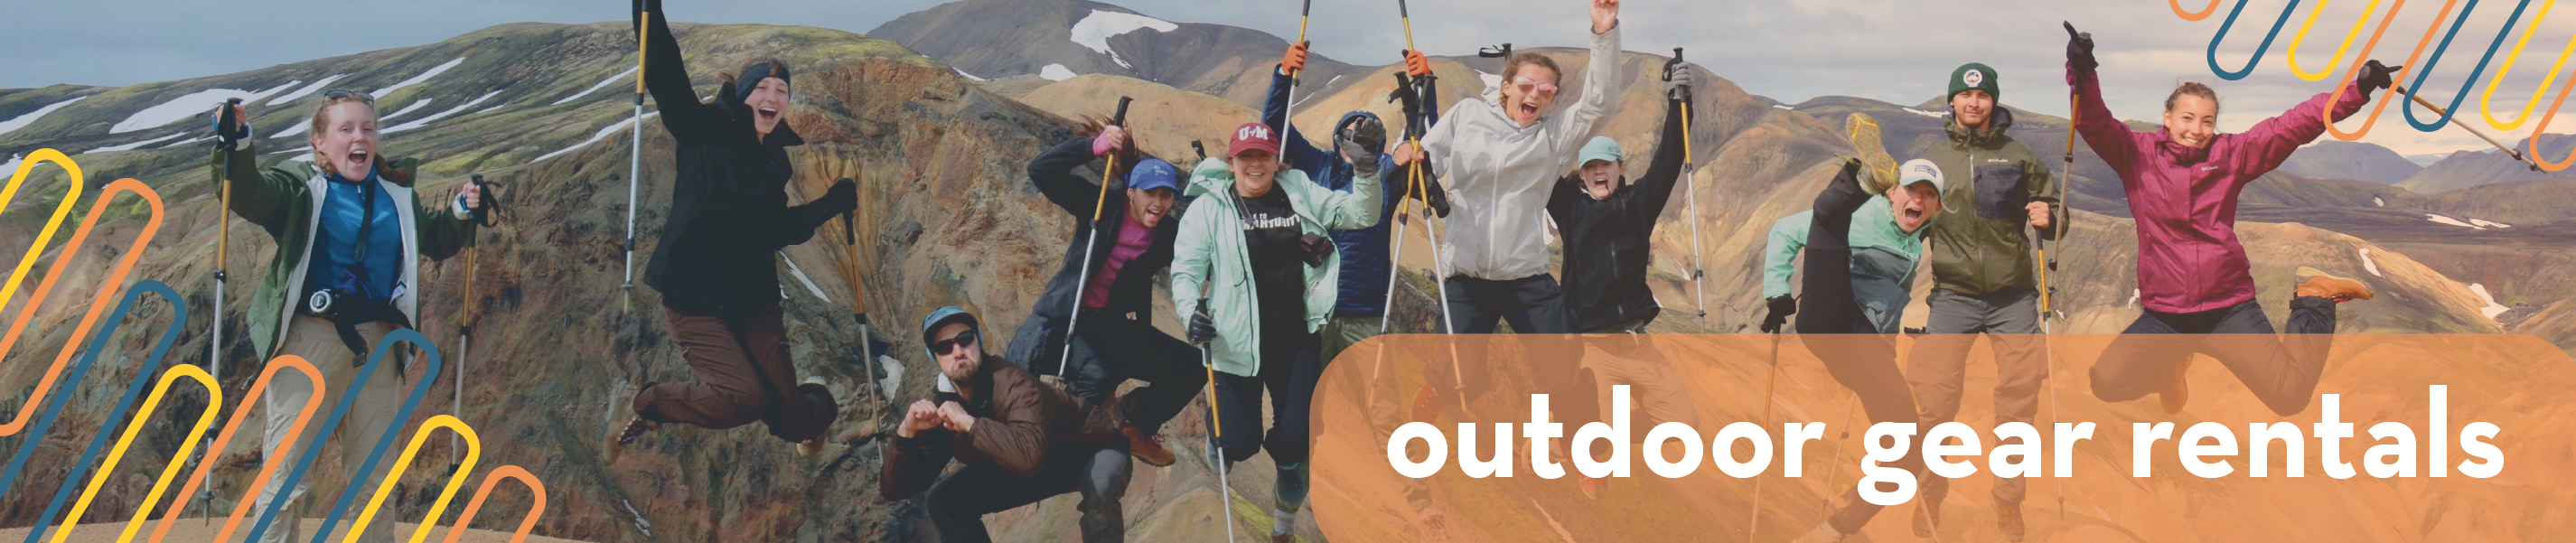 header including a Group of people jumping with backpacks on and a mountain in the background with the title "outdoor gear rentals"